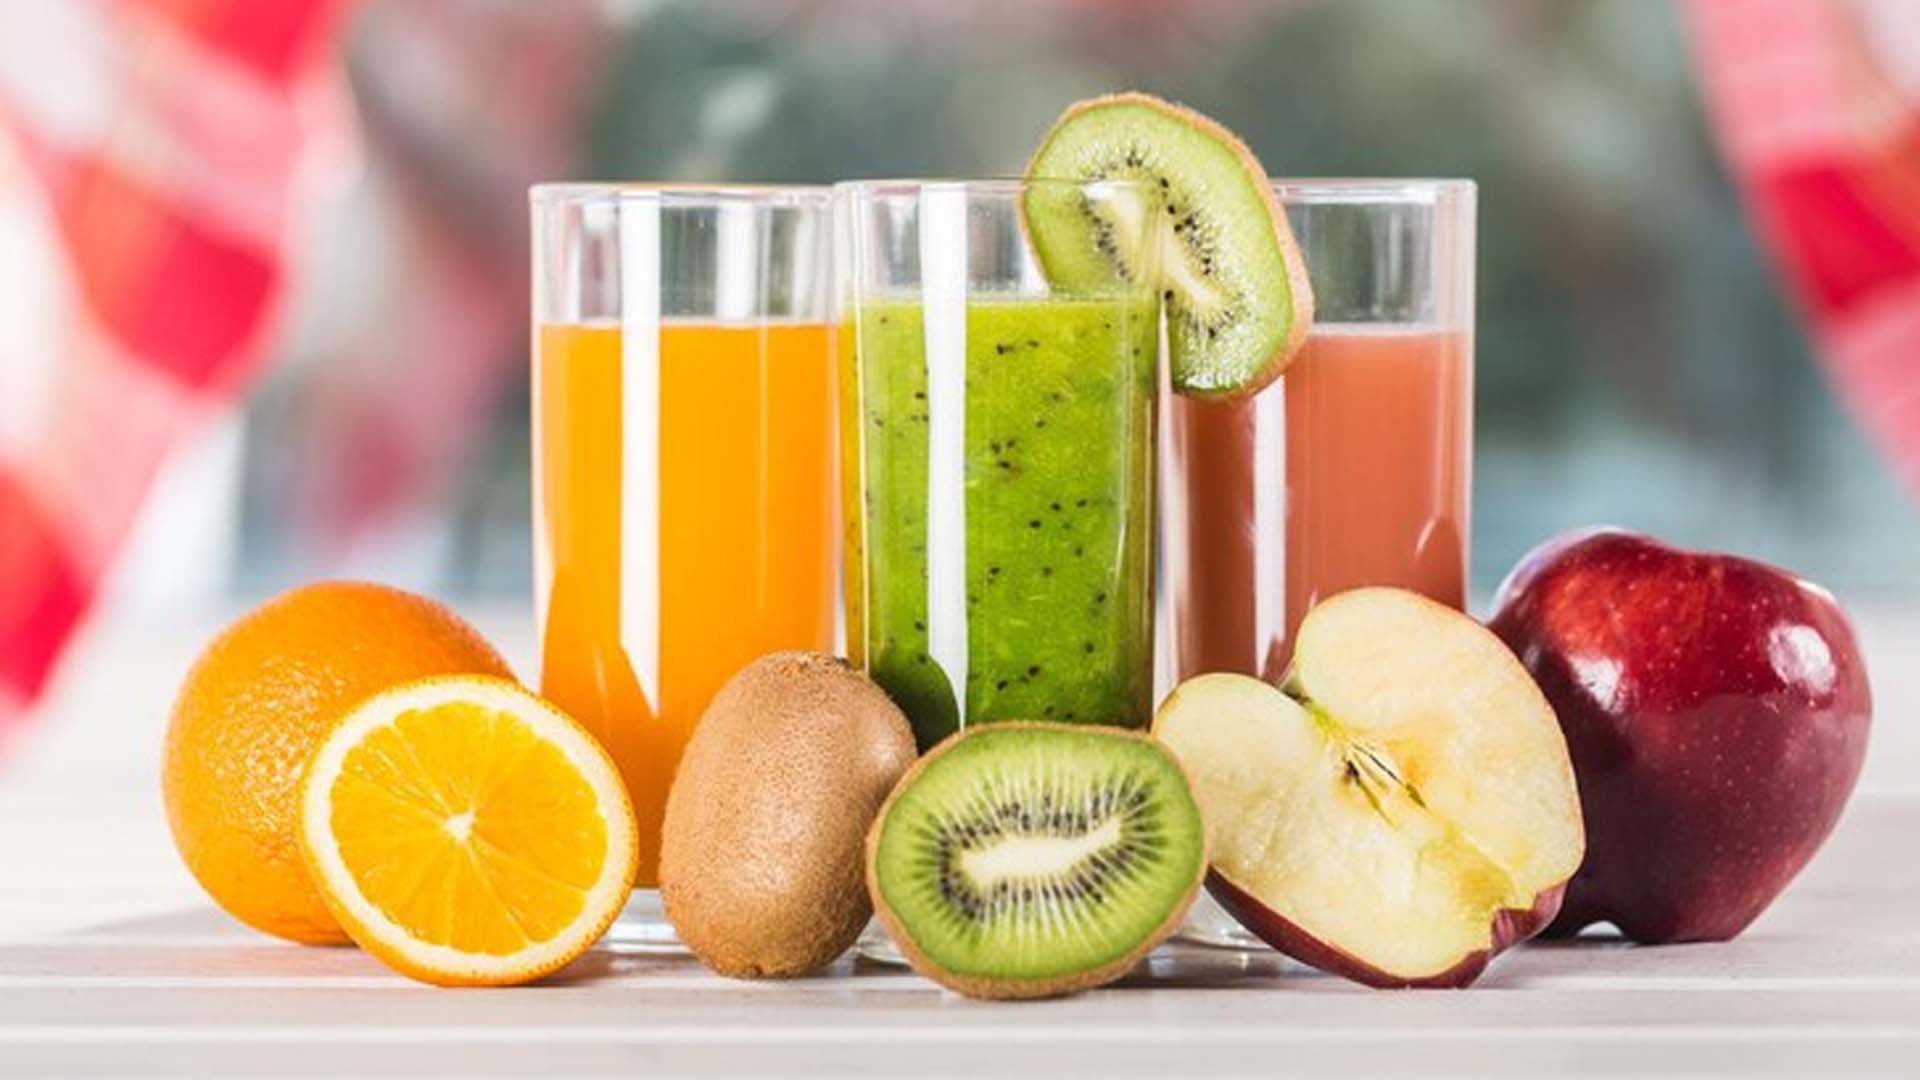 Why Eating Whole Fruit is Better Than Juicing?